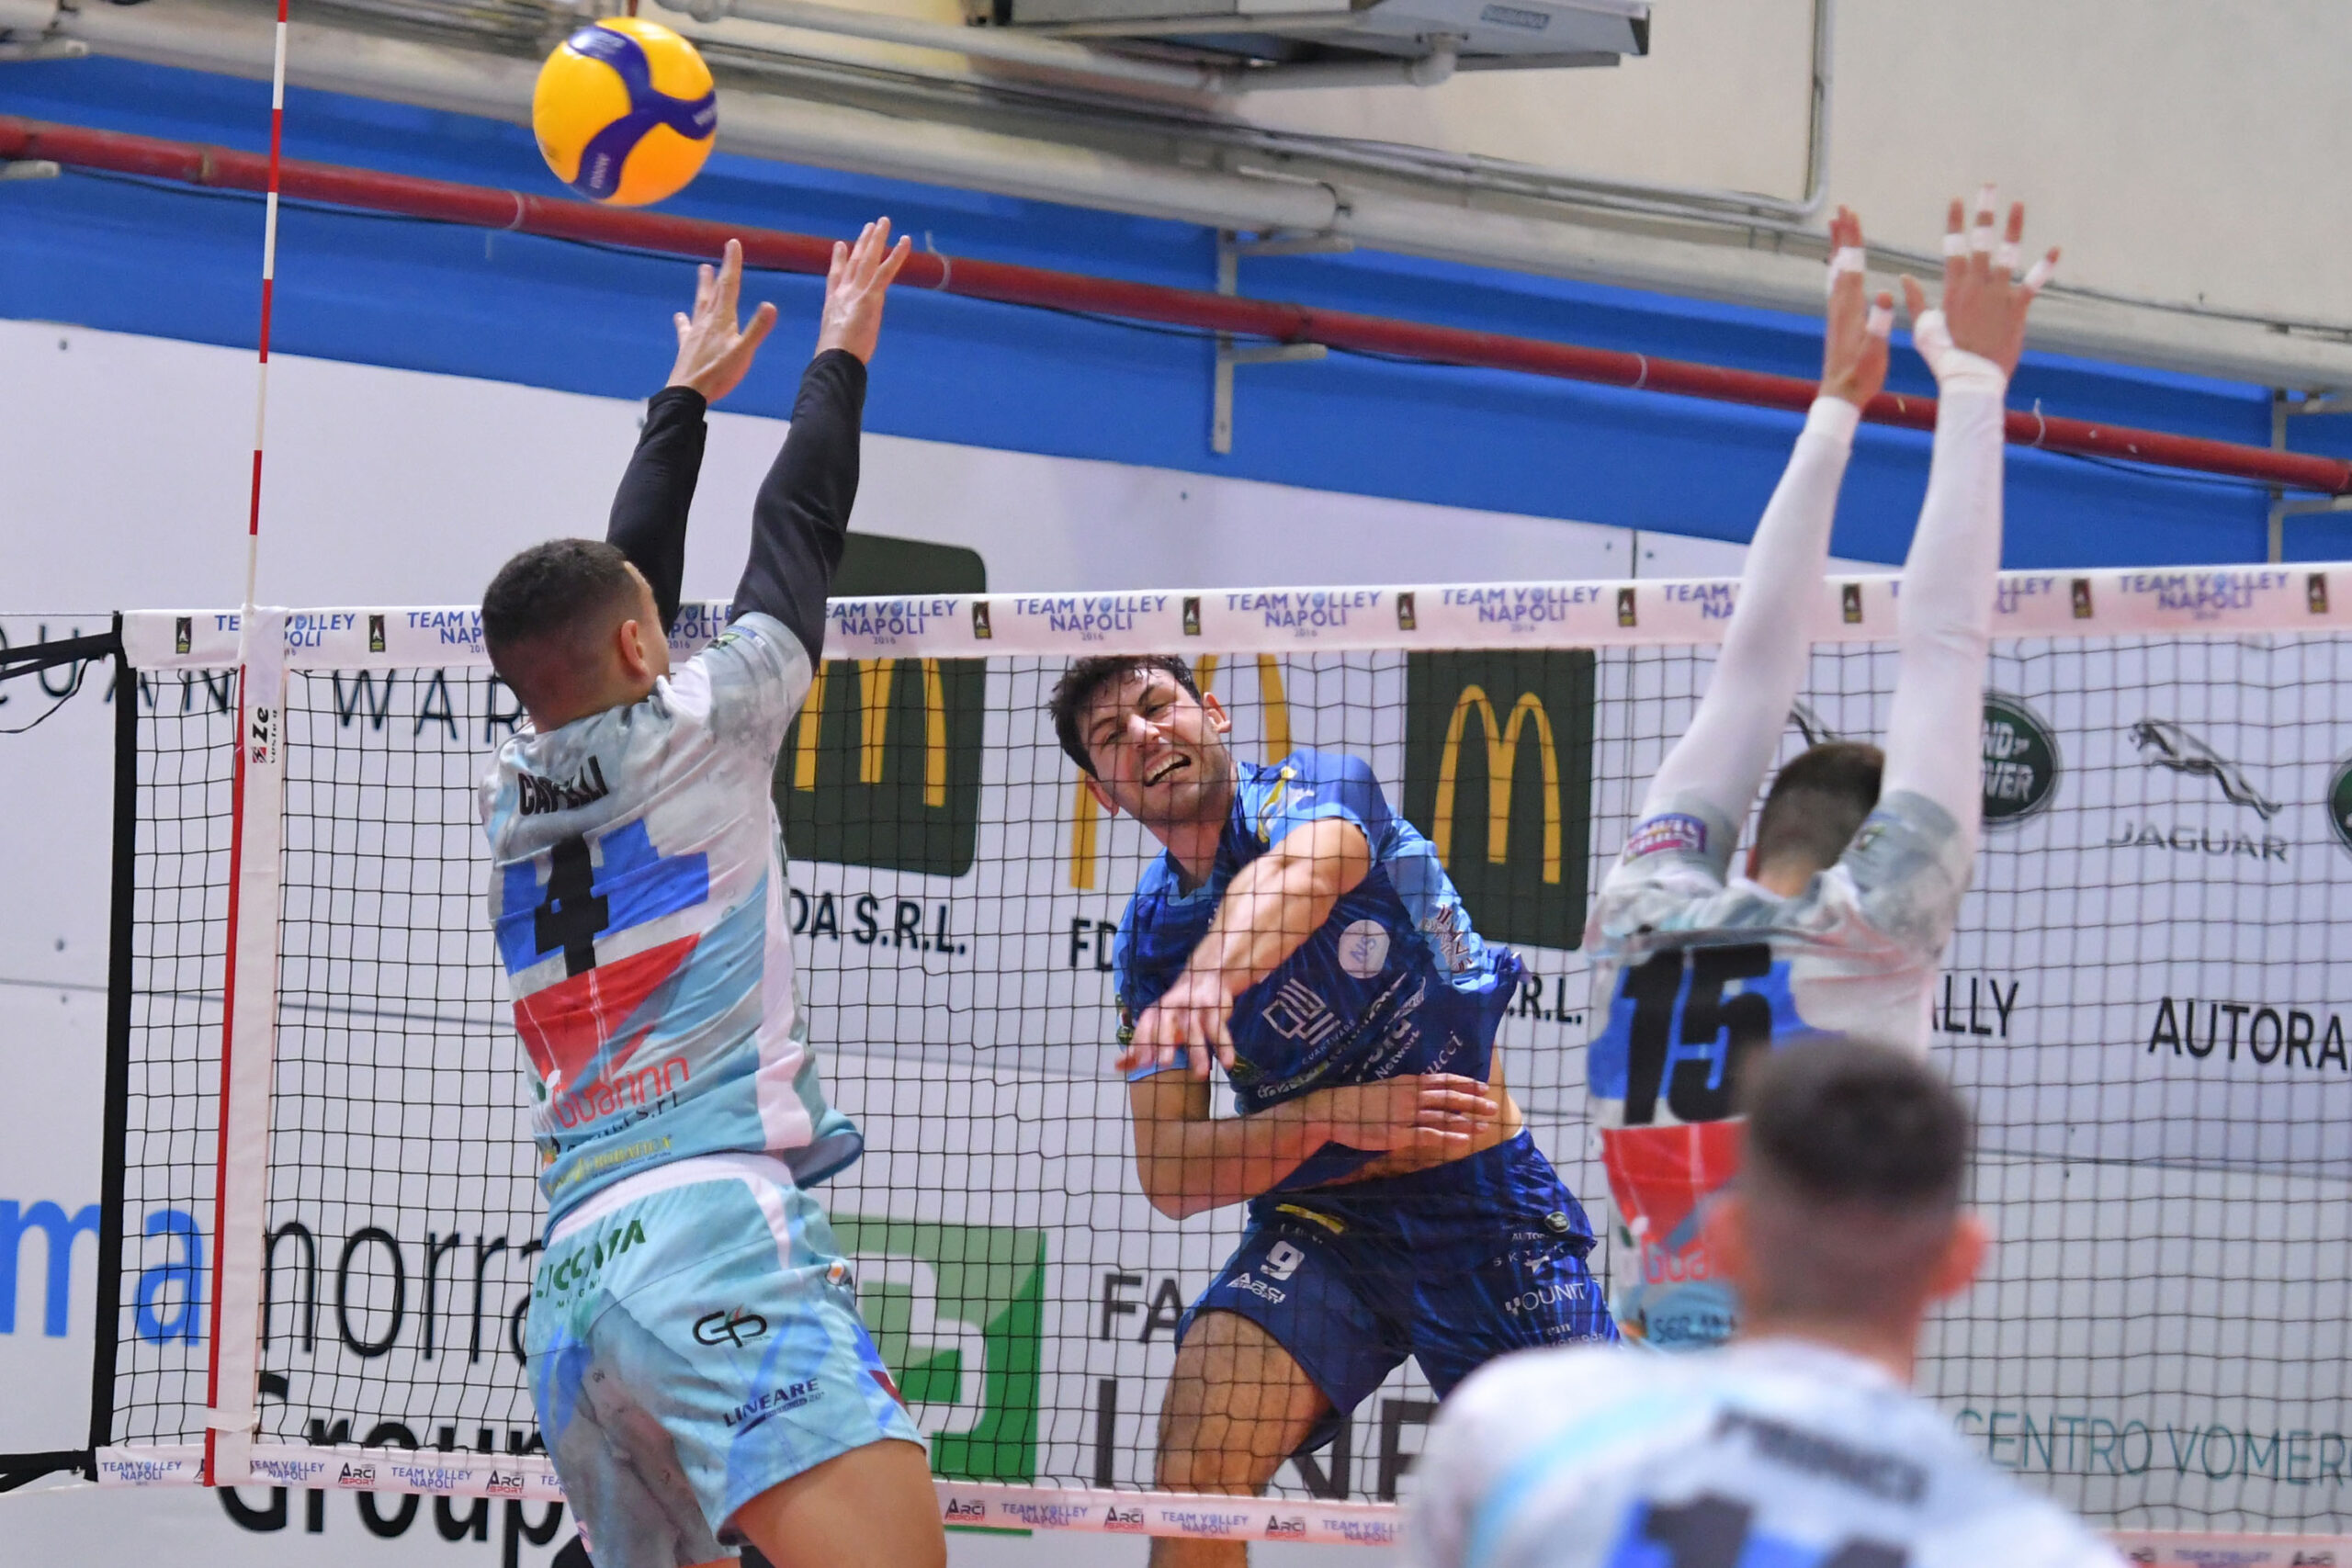 https://www.teamvolleynapoli.it/wp-content/uploads/2023/06/Napoli-Modica_158-scaled.jpg